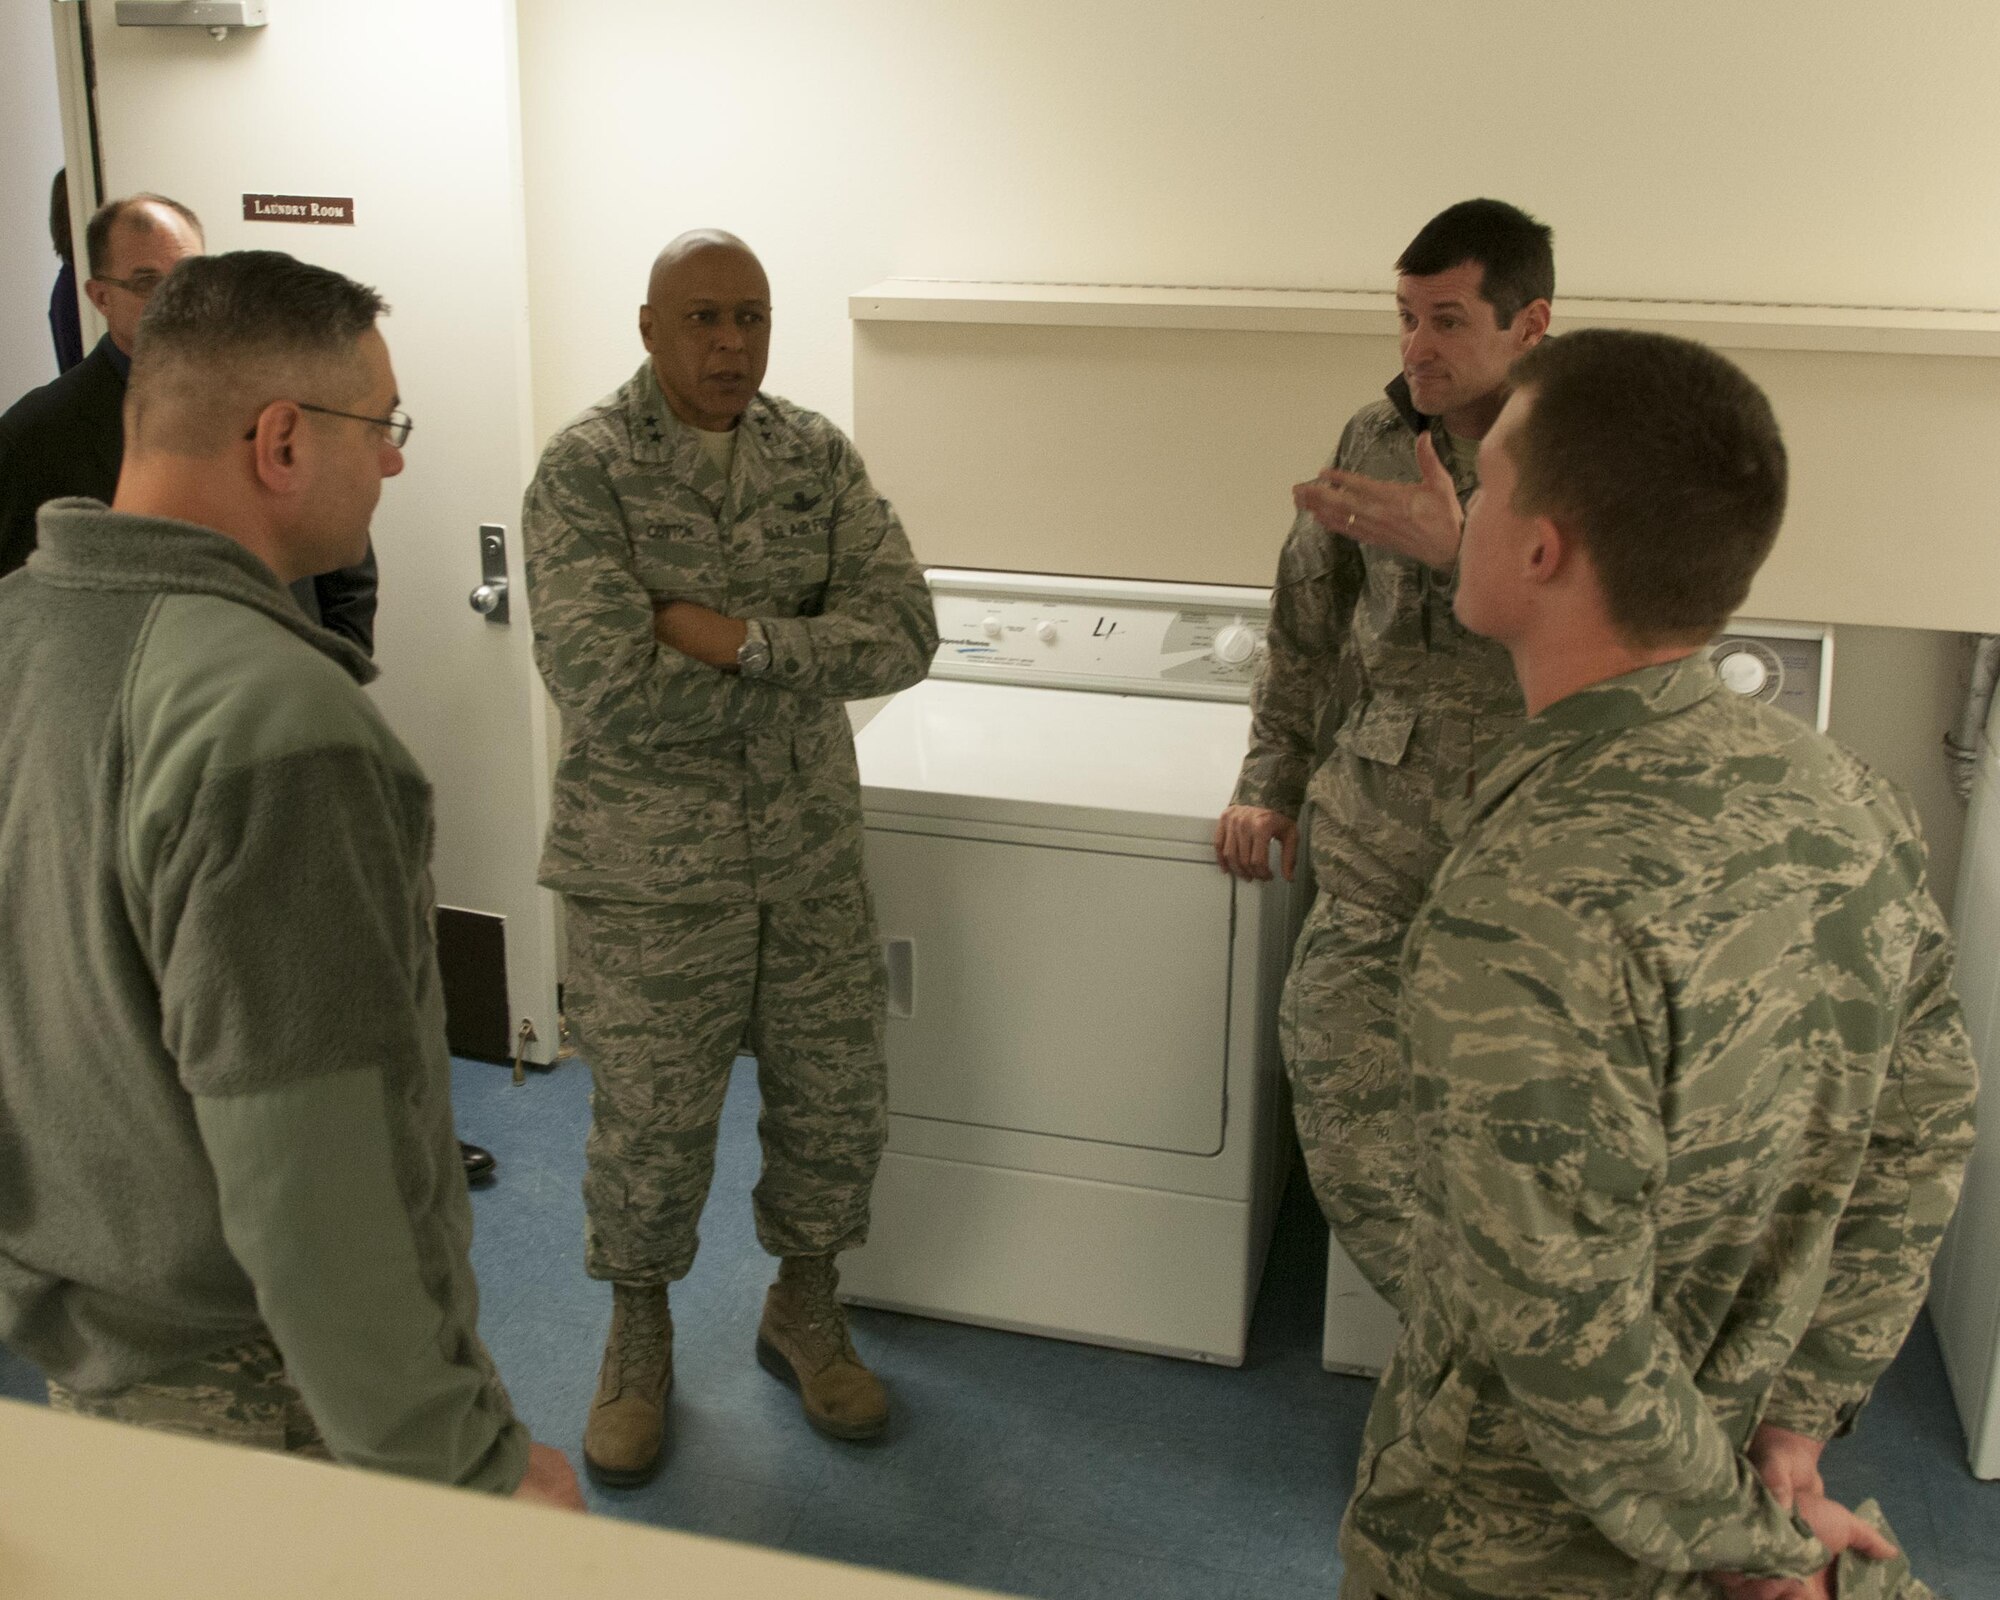 Maj. Gen. Tony Cotton, 20th Air Force and Task Force 214 commander, listens during his tour of a dormitory on F.E. Warren Air Force Base, Wyo., Dec. 9, 2015. Cotton assumed command of the 20th AF and TF-214 Nov. 16. (U.S. Air Force photo by Airman 1st Class Malcolm Mayfield)